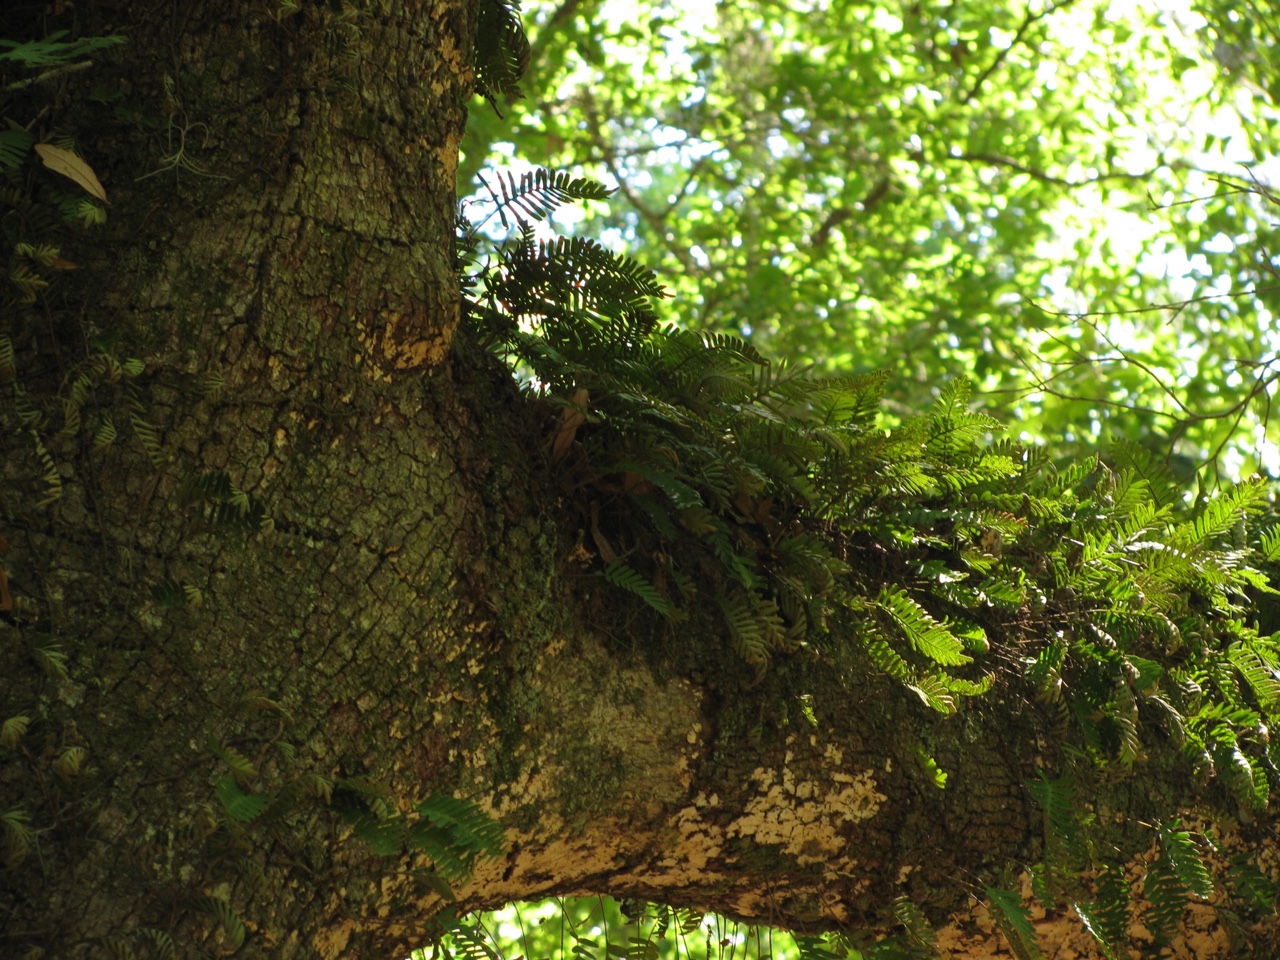 The Scientific Name is Pleopeltis michauxiana [= Polypodium polypodioides, Pleopeltis polypodioides]. You will likely hear them called Resurrection fern. This picture shows the Growing on a tree limb of Pleopeltis michauxiana [= Polypodium polypodioides, Pleopeltis polypodioides]